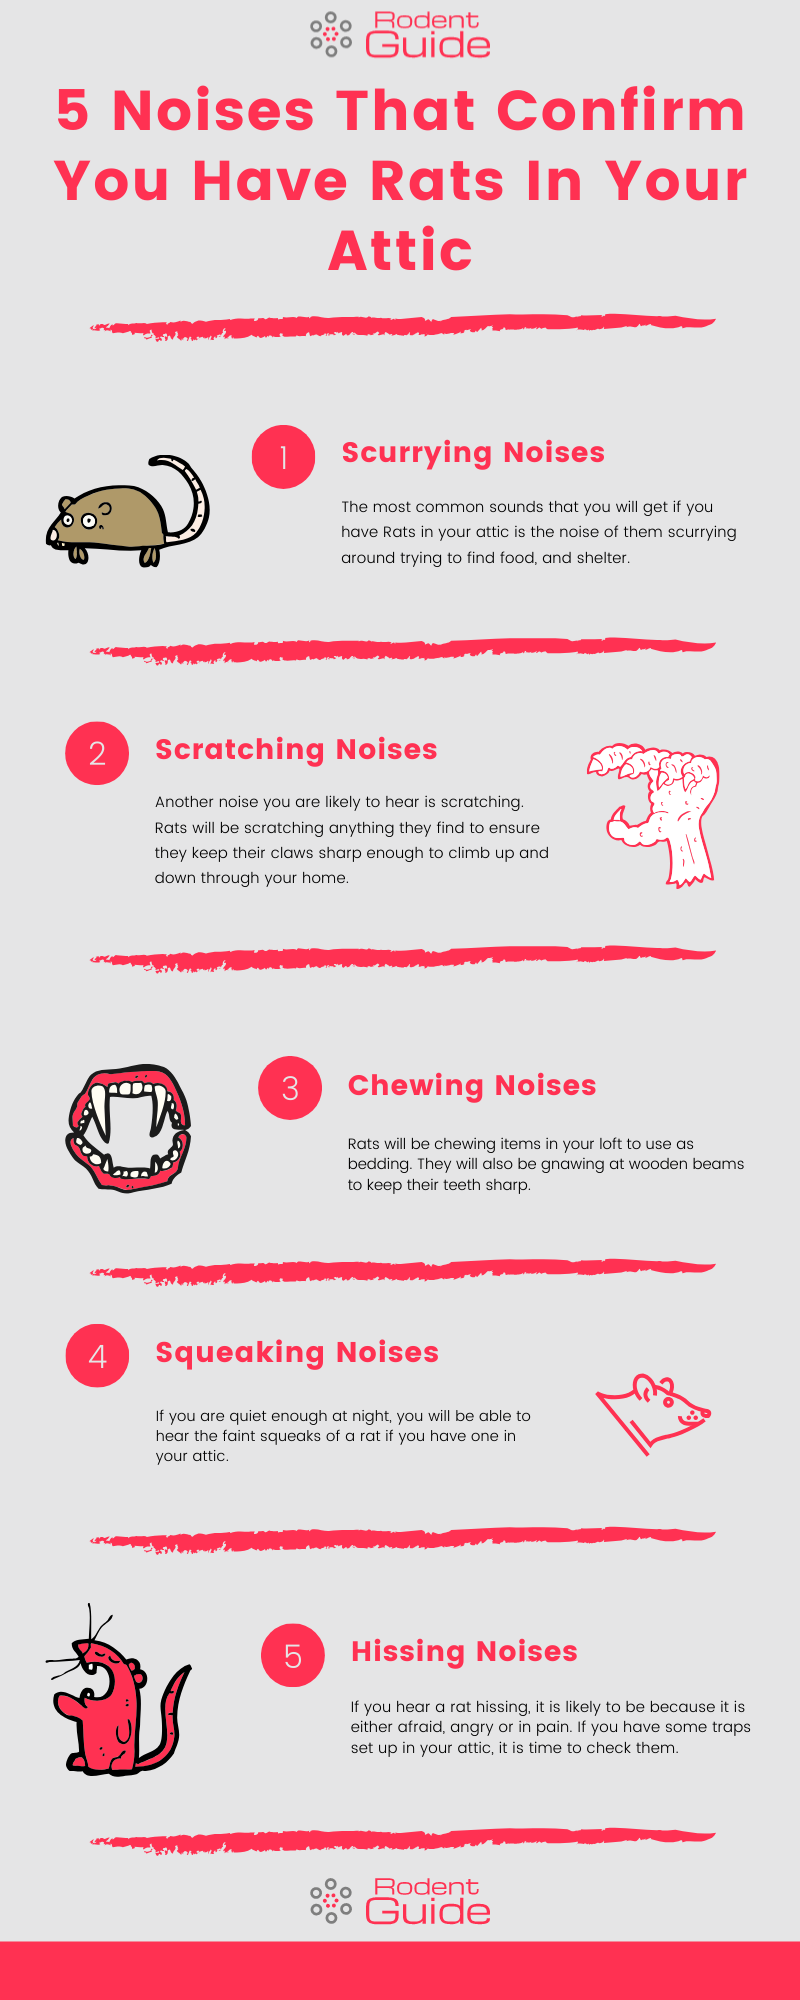 5 Noises That Confirm You Have Rats In Your Attic Infographic